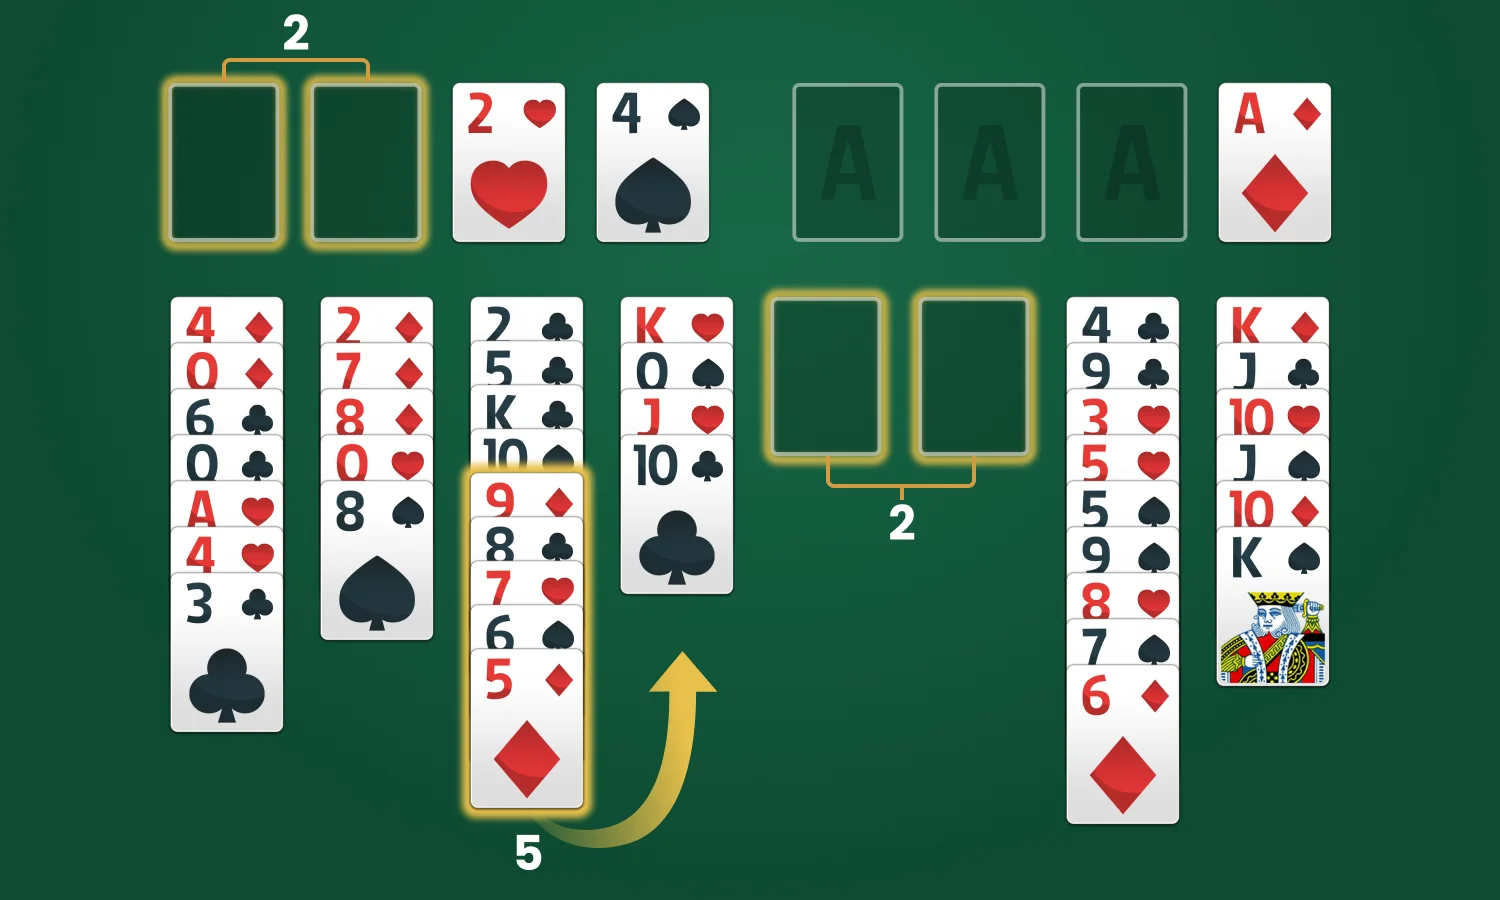 FreeCell Solitaire Rules: Move Sequences of Cards